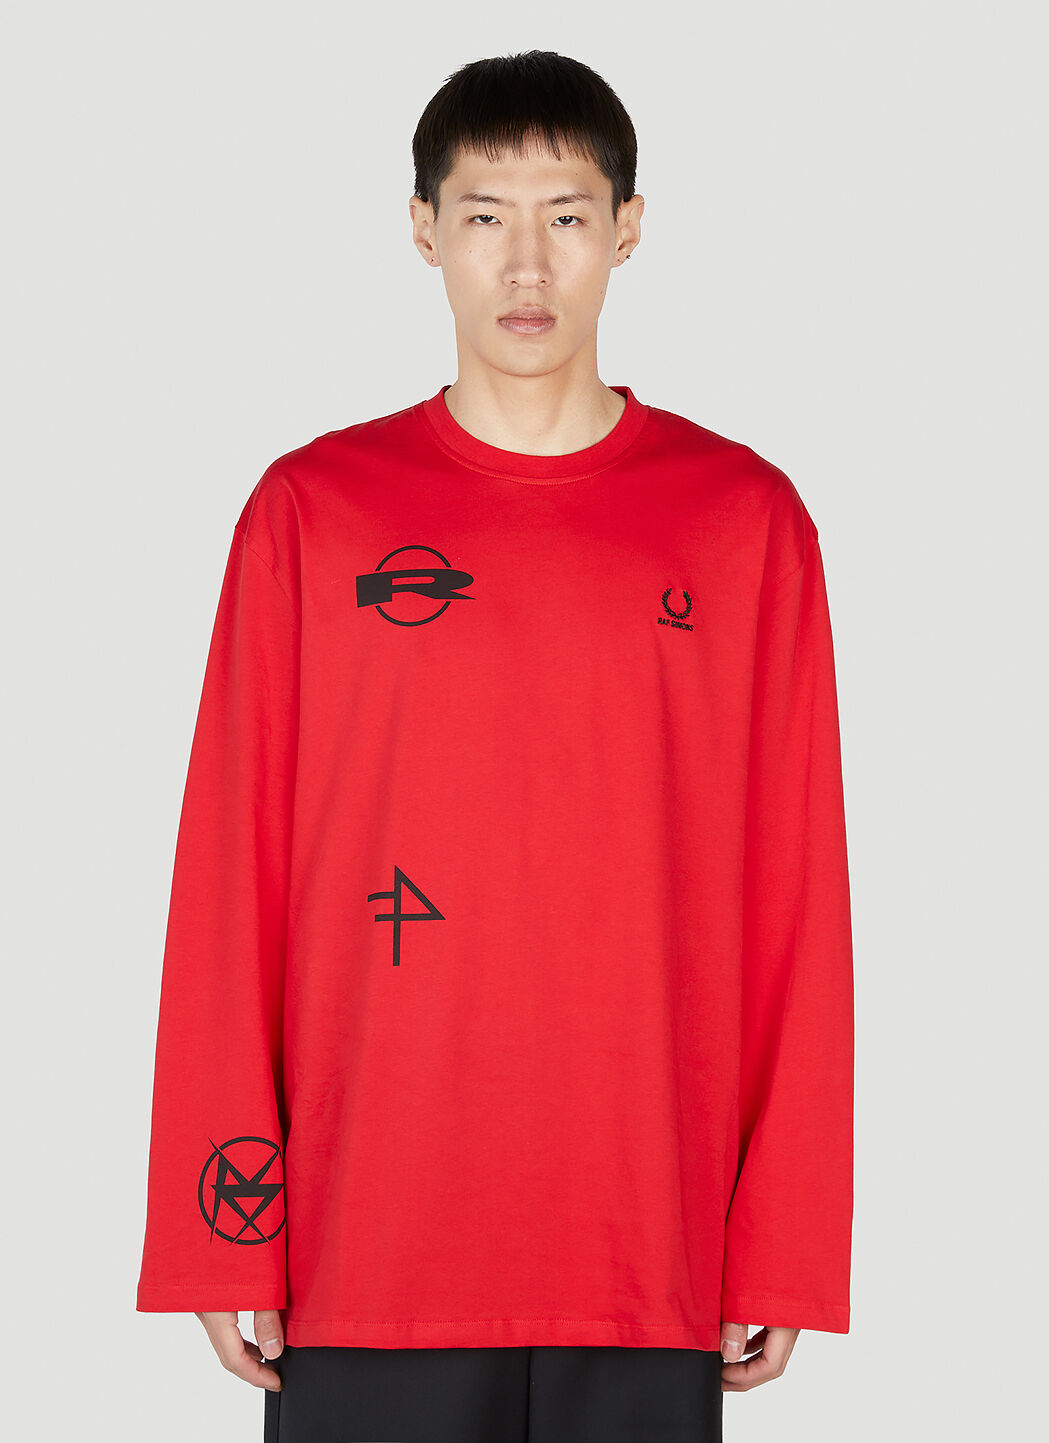 Raf Simons x Fred Perry プリントロングスリーブTシャツ ブラック rsf0152002